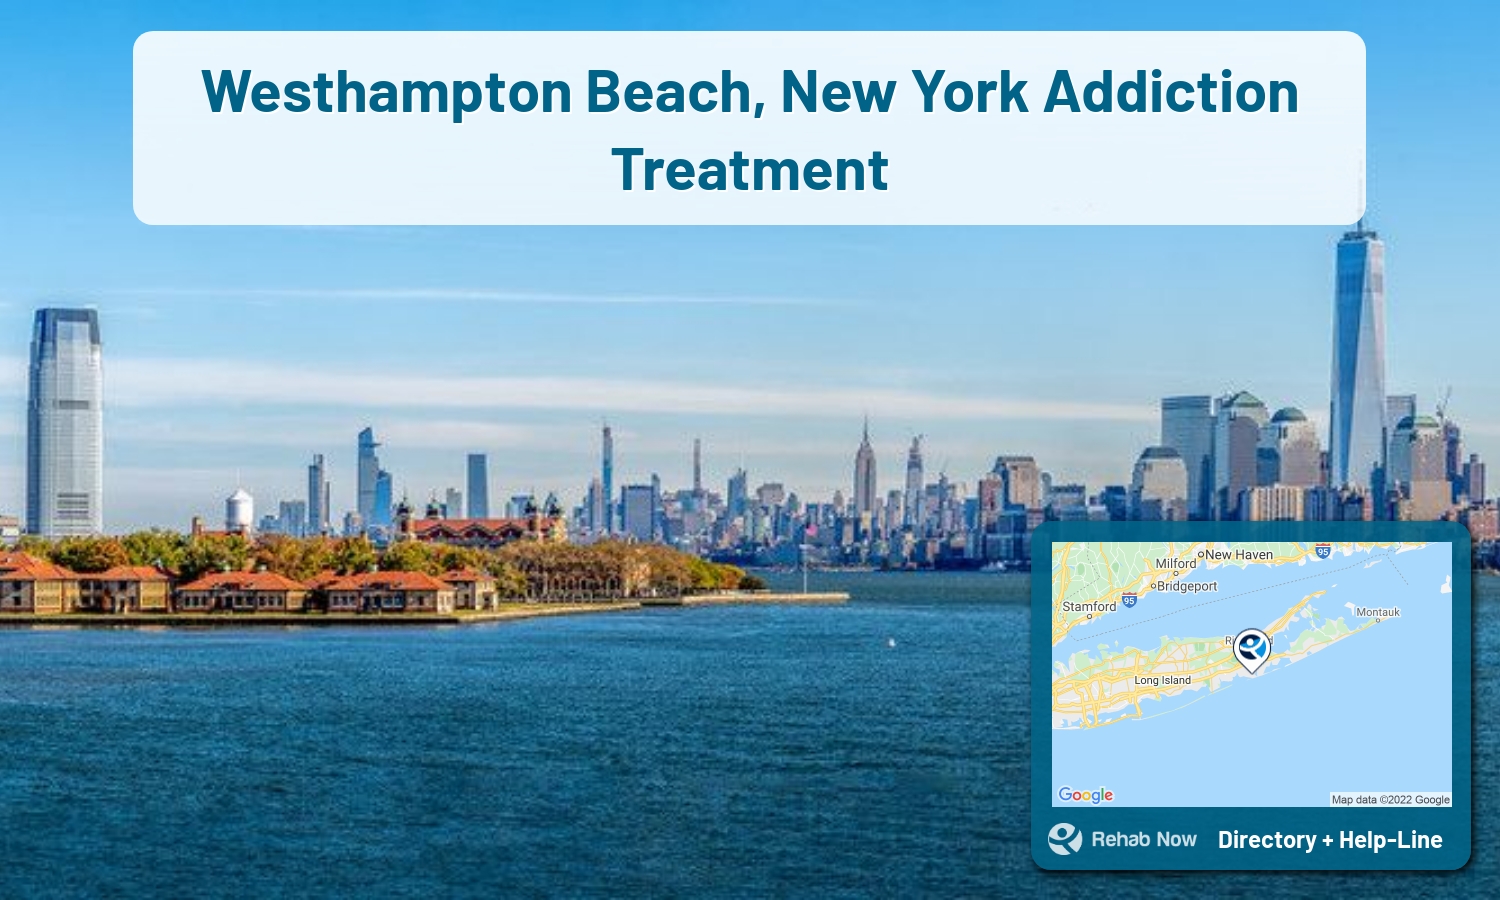 Drug rehab and alcohol treatment services nearby Westhampton Beach, NY. Need help choosing a treatment program? Call our free hotline!